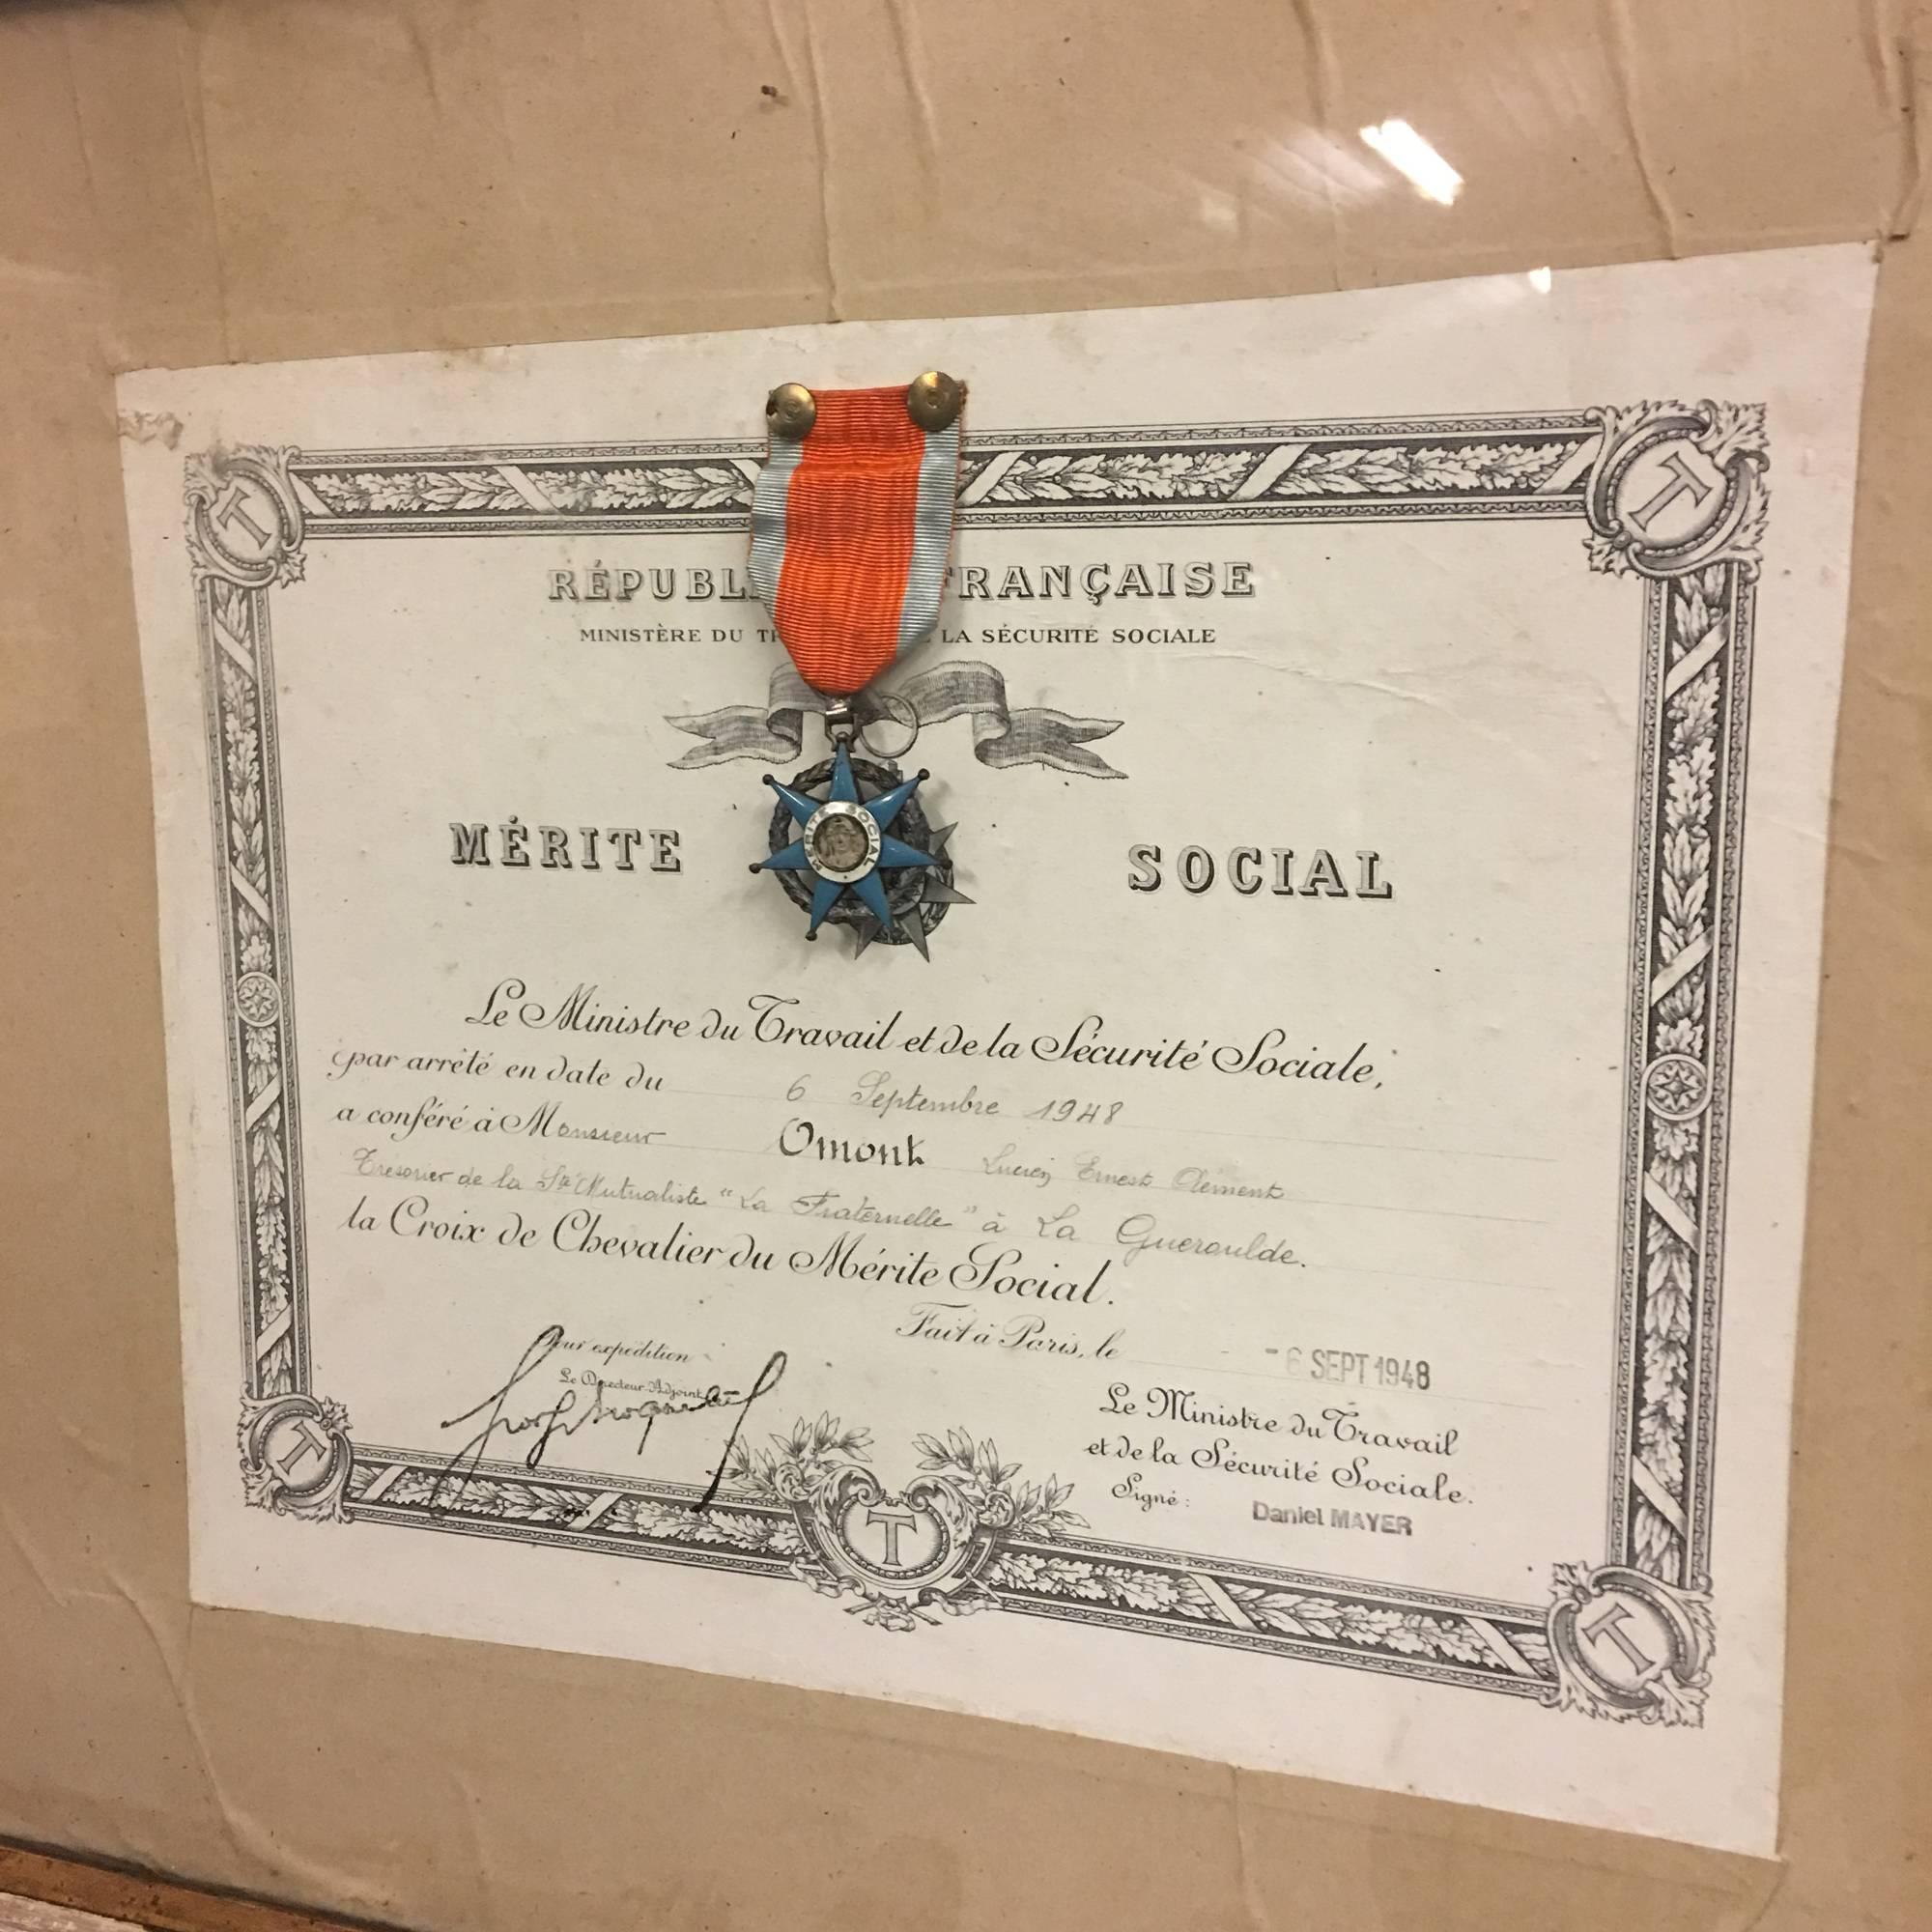 Order of societal merit. Gilt plaster wooden frame with original medal. 1948 The order was created on 25 October 1936 and modified on 14 February 1937 and intended to recognise outstanding service to Provident and Mutual Associations and